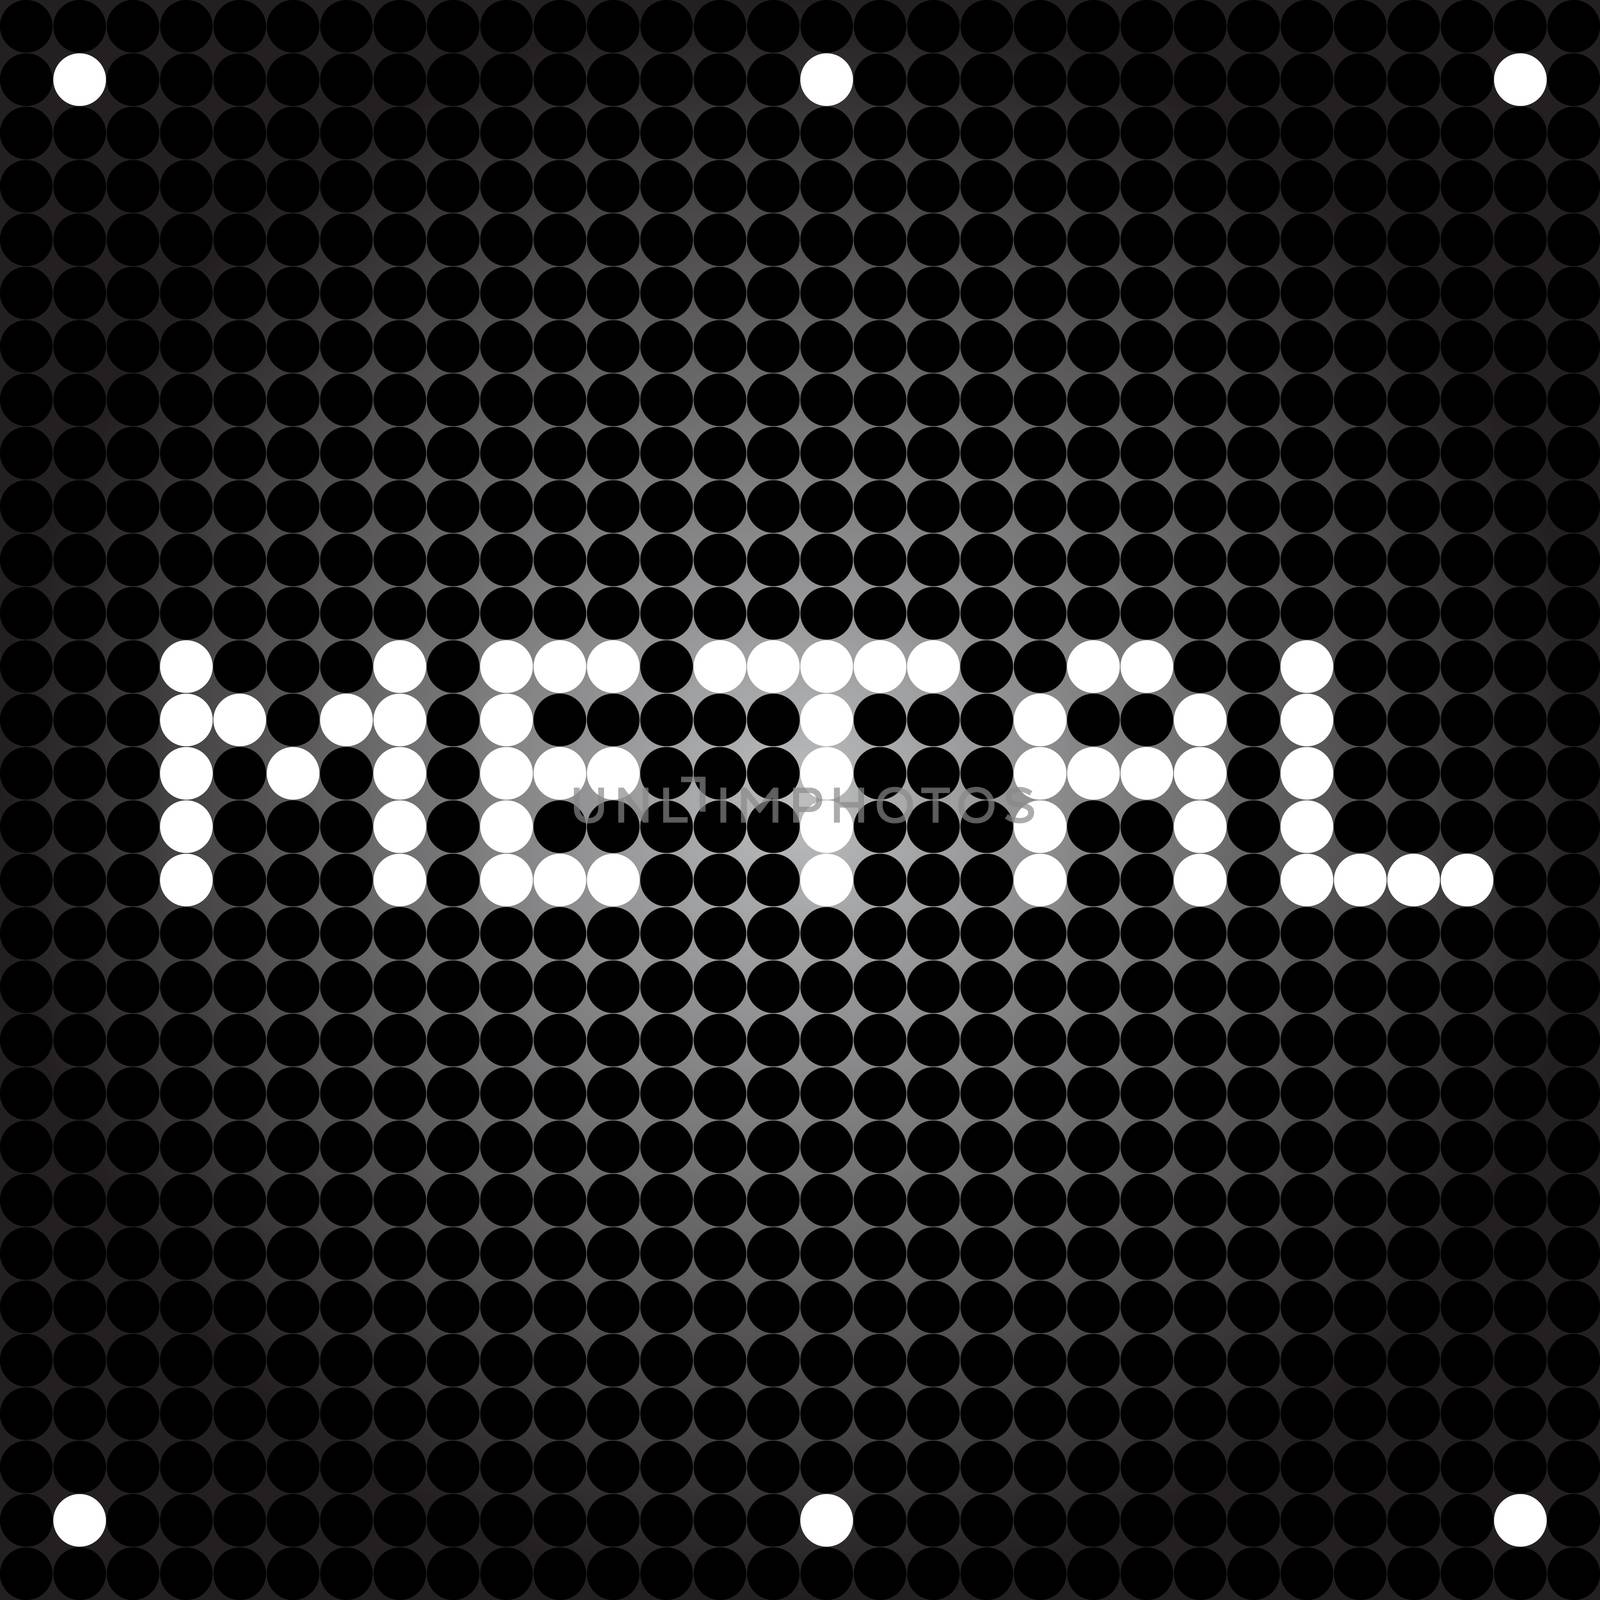 Metal music card, pixel illustration of a scoreboard composition with digital text made of dots